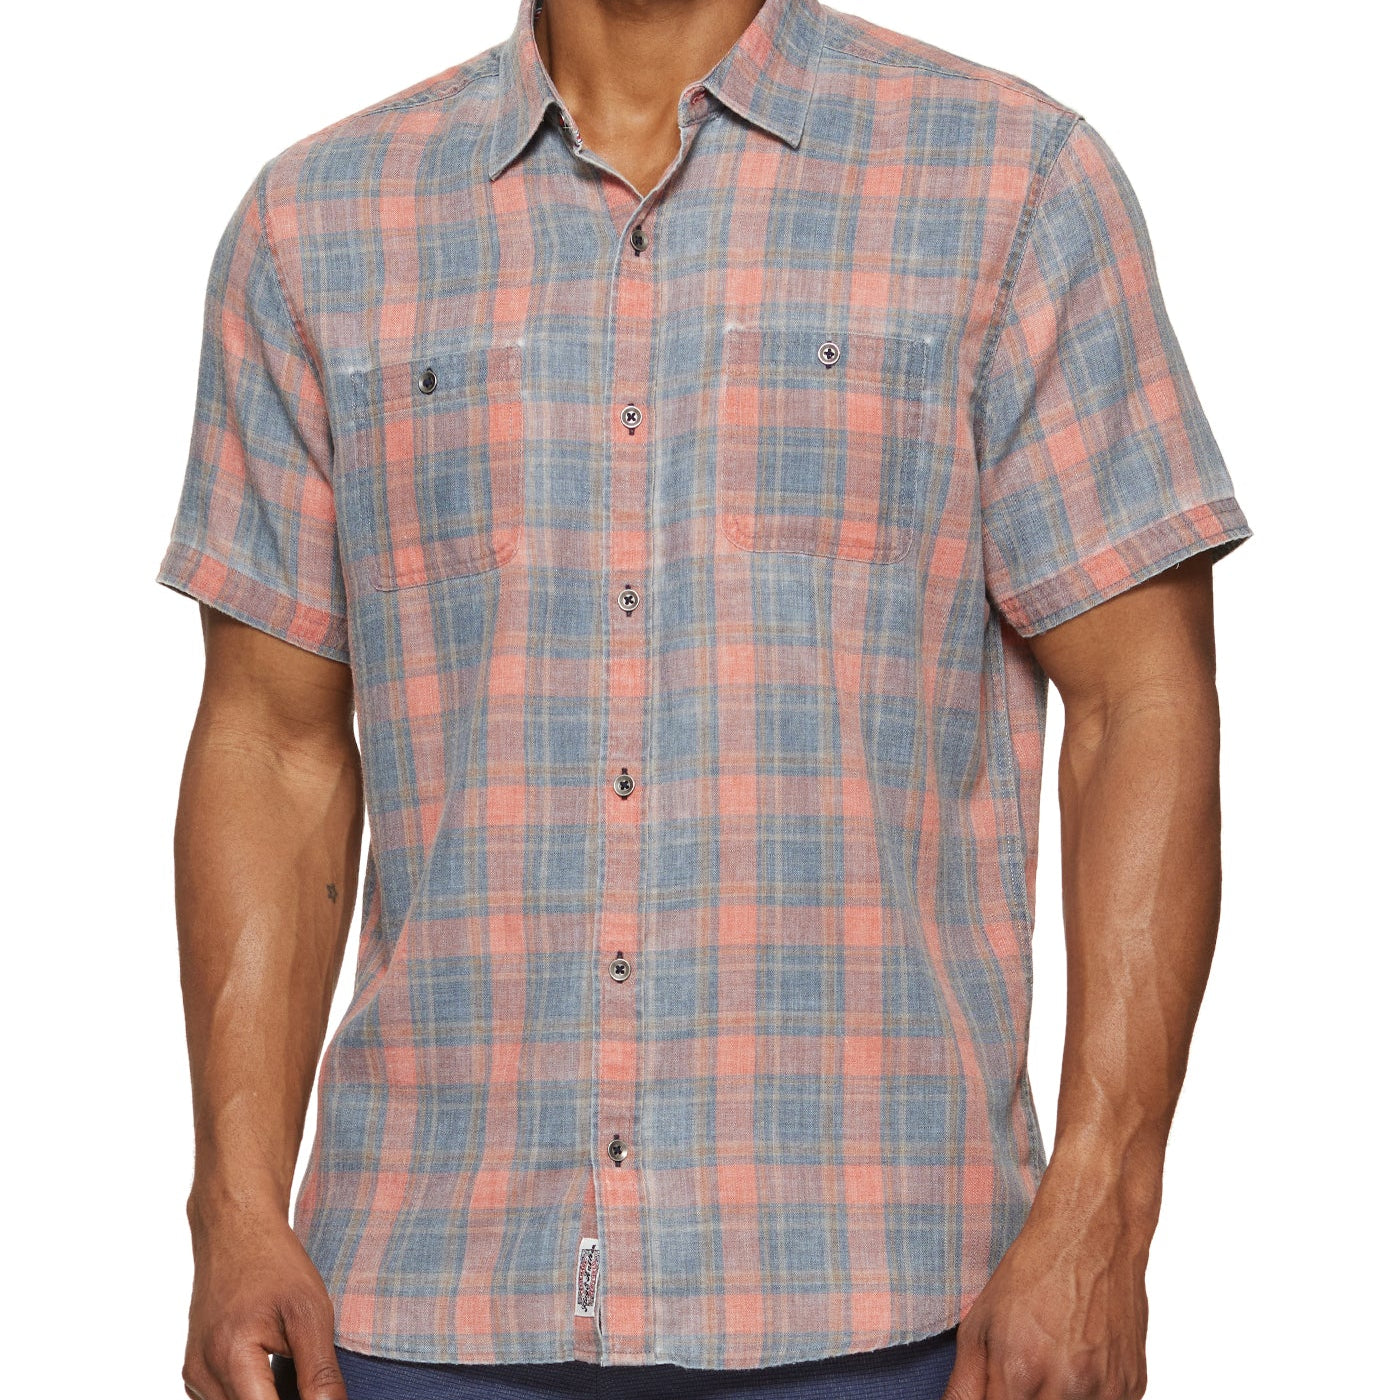 Jamestown-Men's Tops-Vixen Collection, Day Spa and Women's Boutique Located in Seattle, Washington